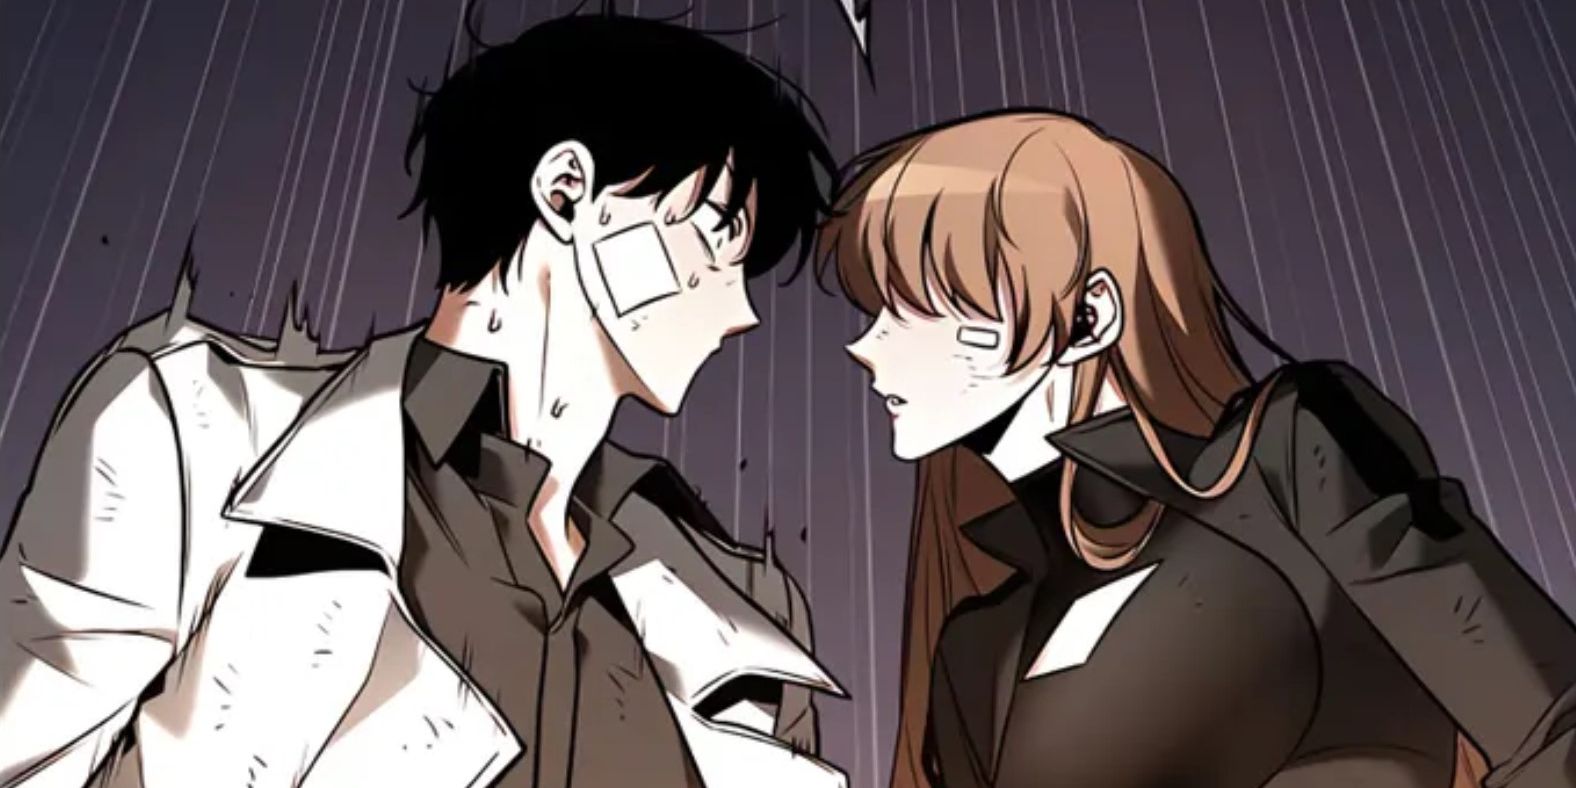 A duel between the chosen ones plays out in Omniscient Reader's Viewpoint manhwa